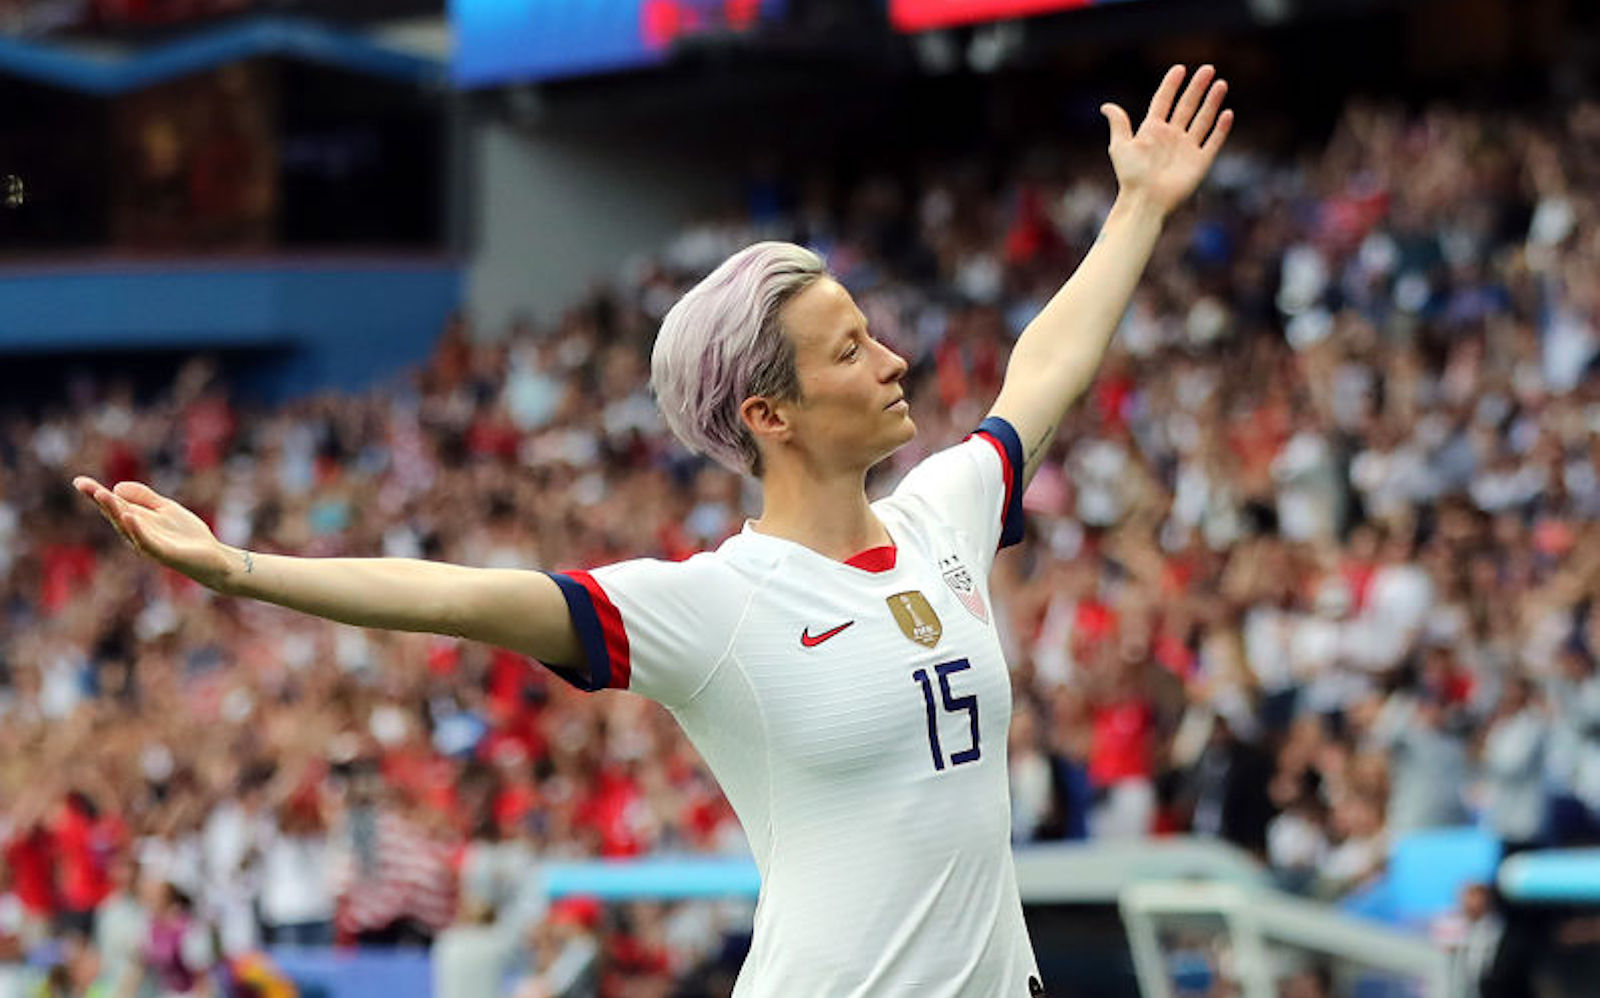 Megan Rapinoe #15 of the United States celebrates her goal in the first half against France during the 2019 FIFA Women's World Cup France Quarter Final match between France and USA at Parc des Princes on June 28, 2019 in Paris, France.